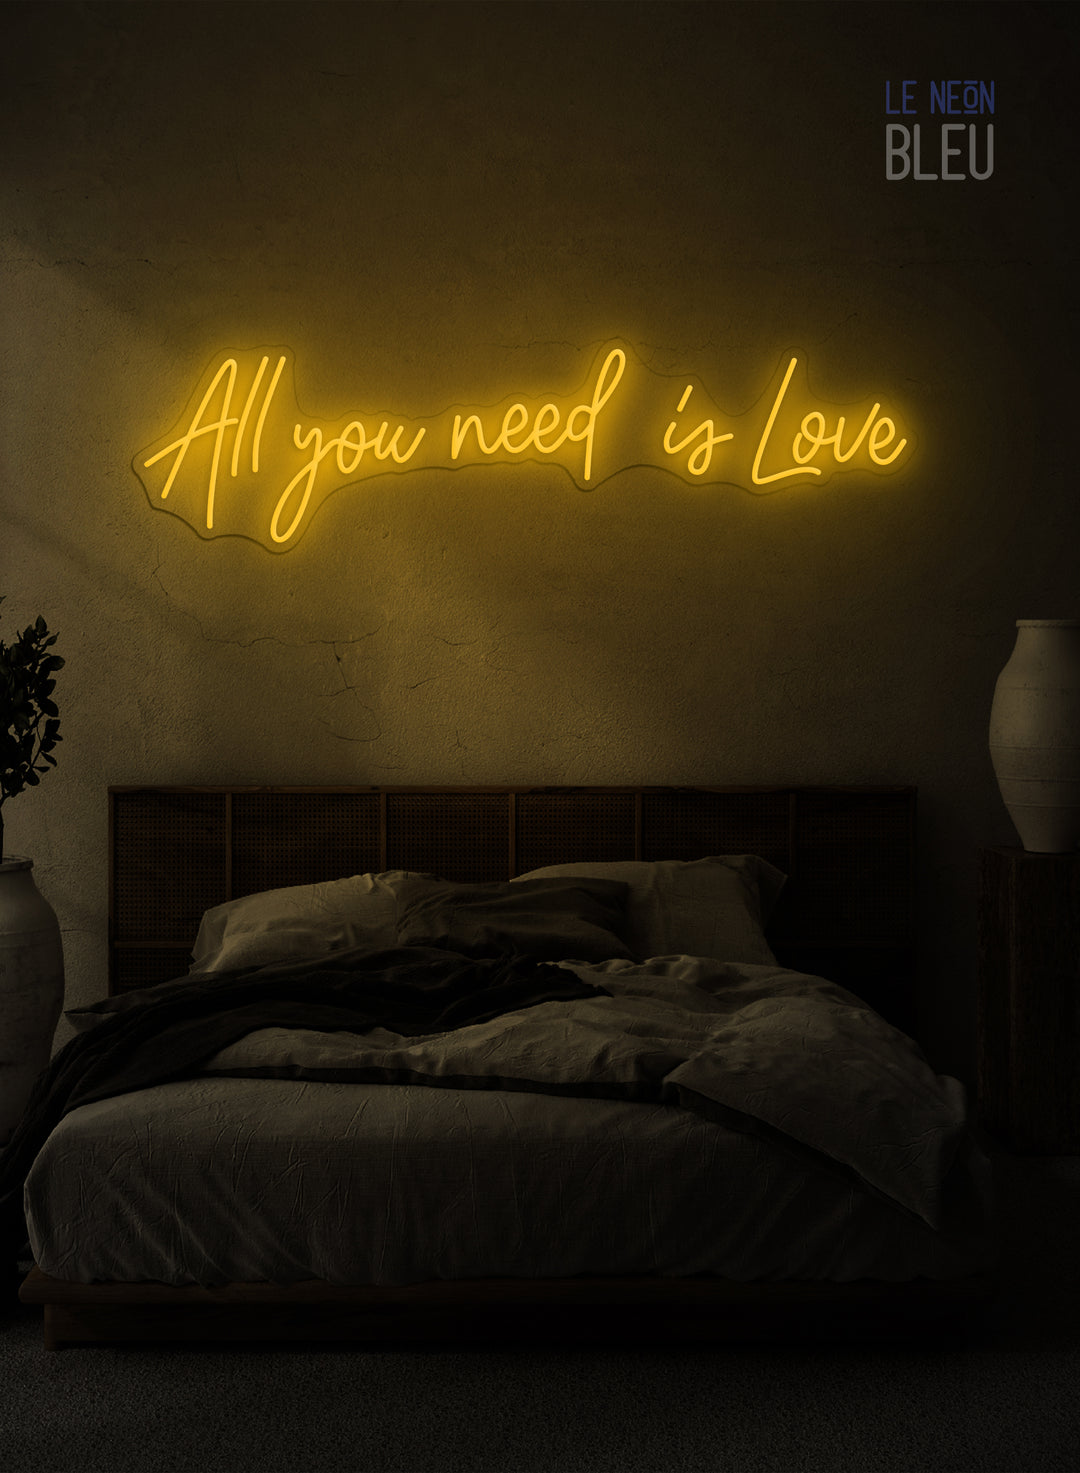 All you need is love - Néon LED